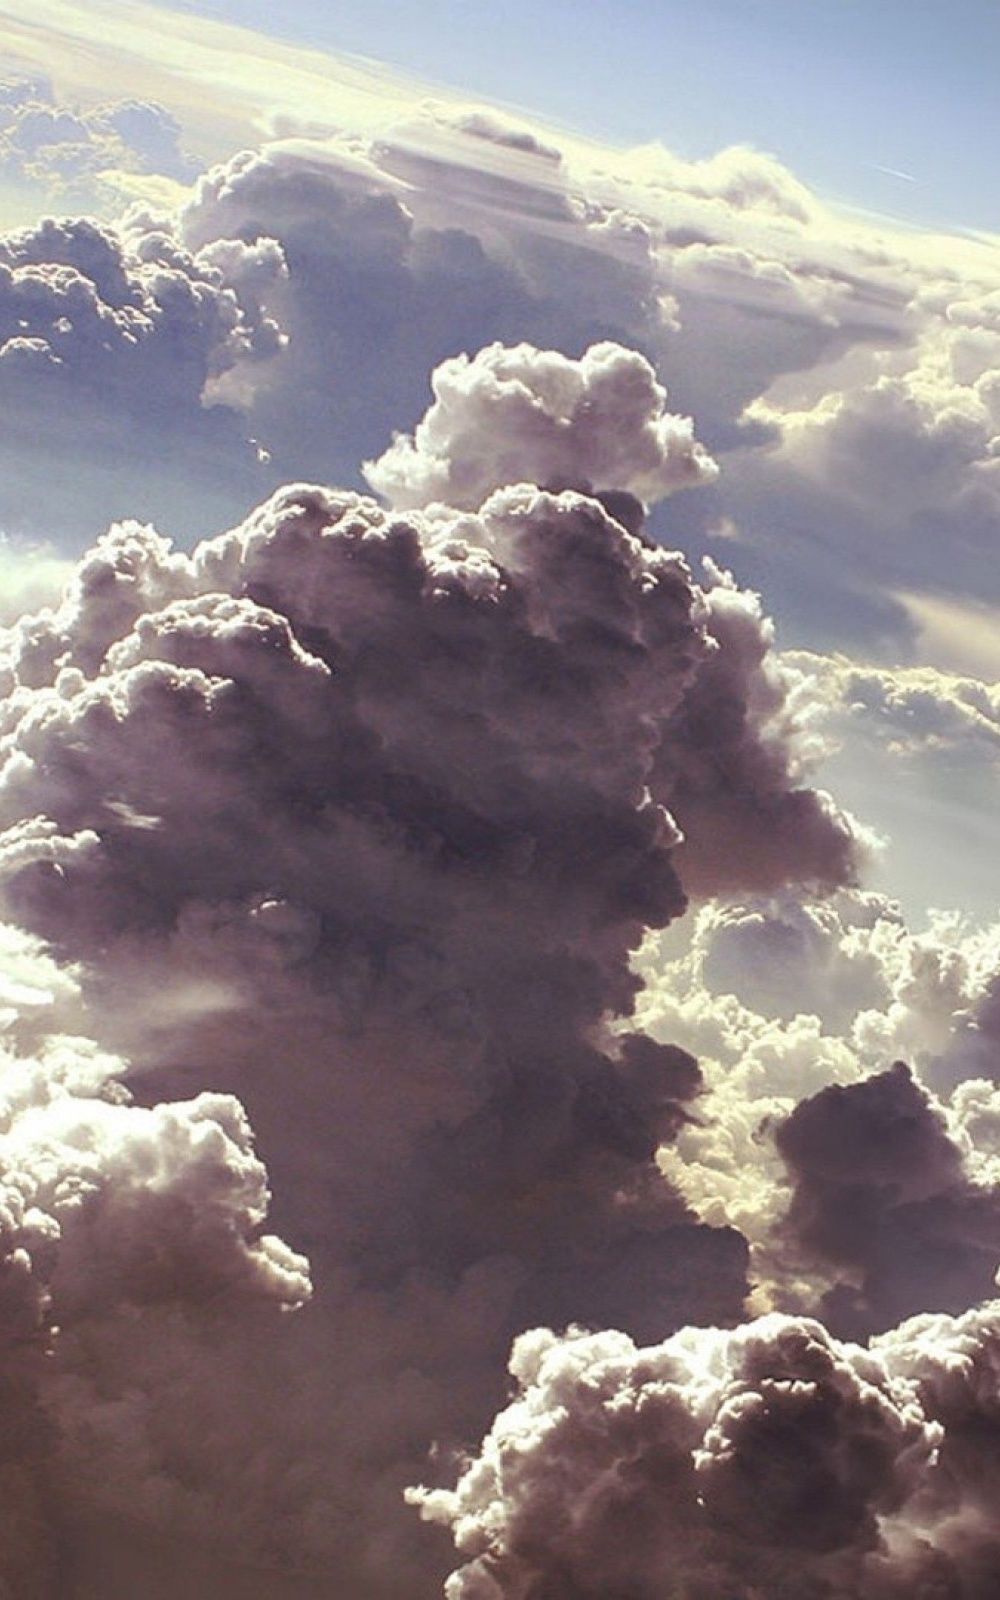 Vintage Aesthetic Clouds Wallpaper Free Vintage Aesthetic Clouds Background